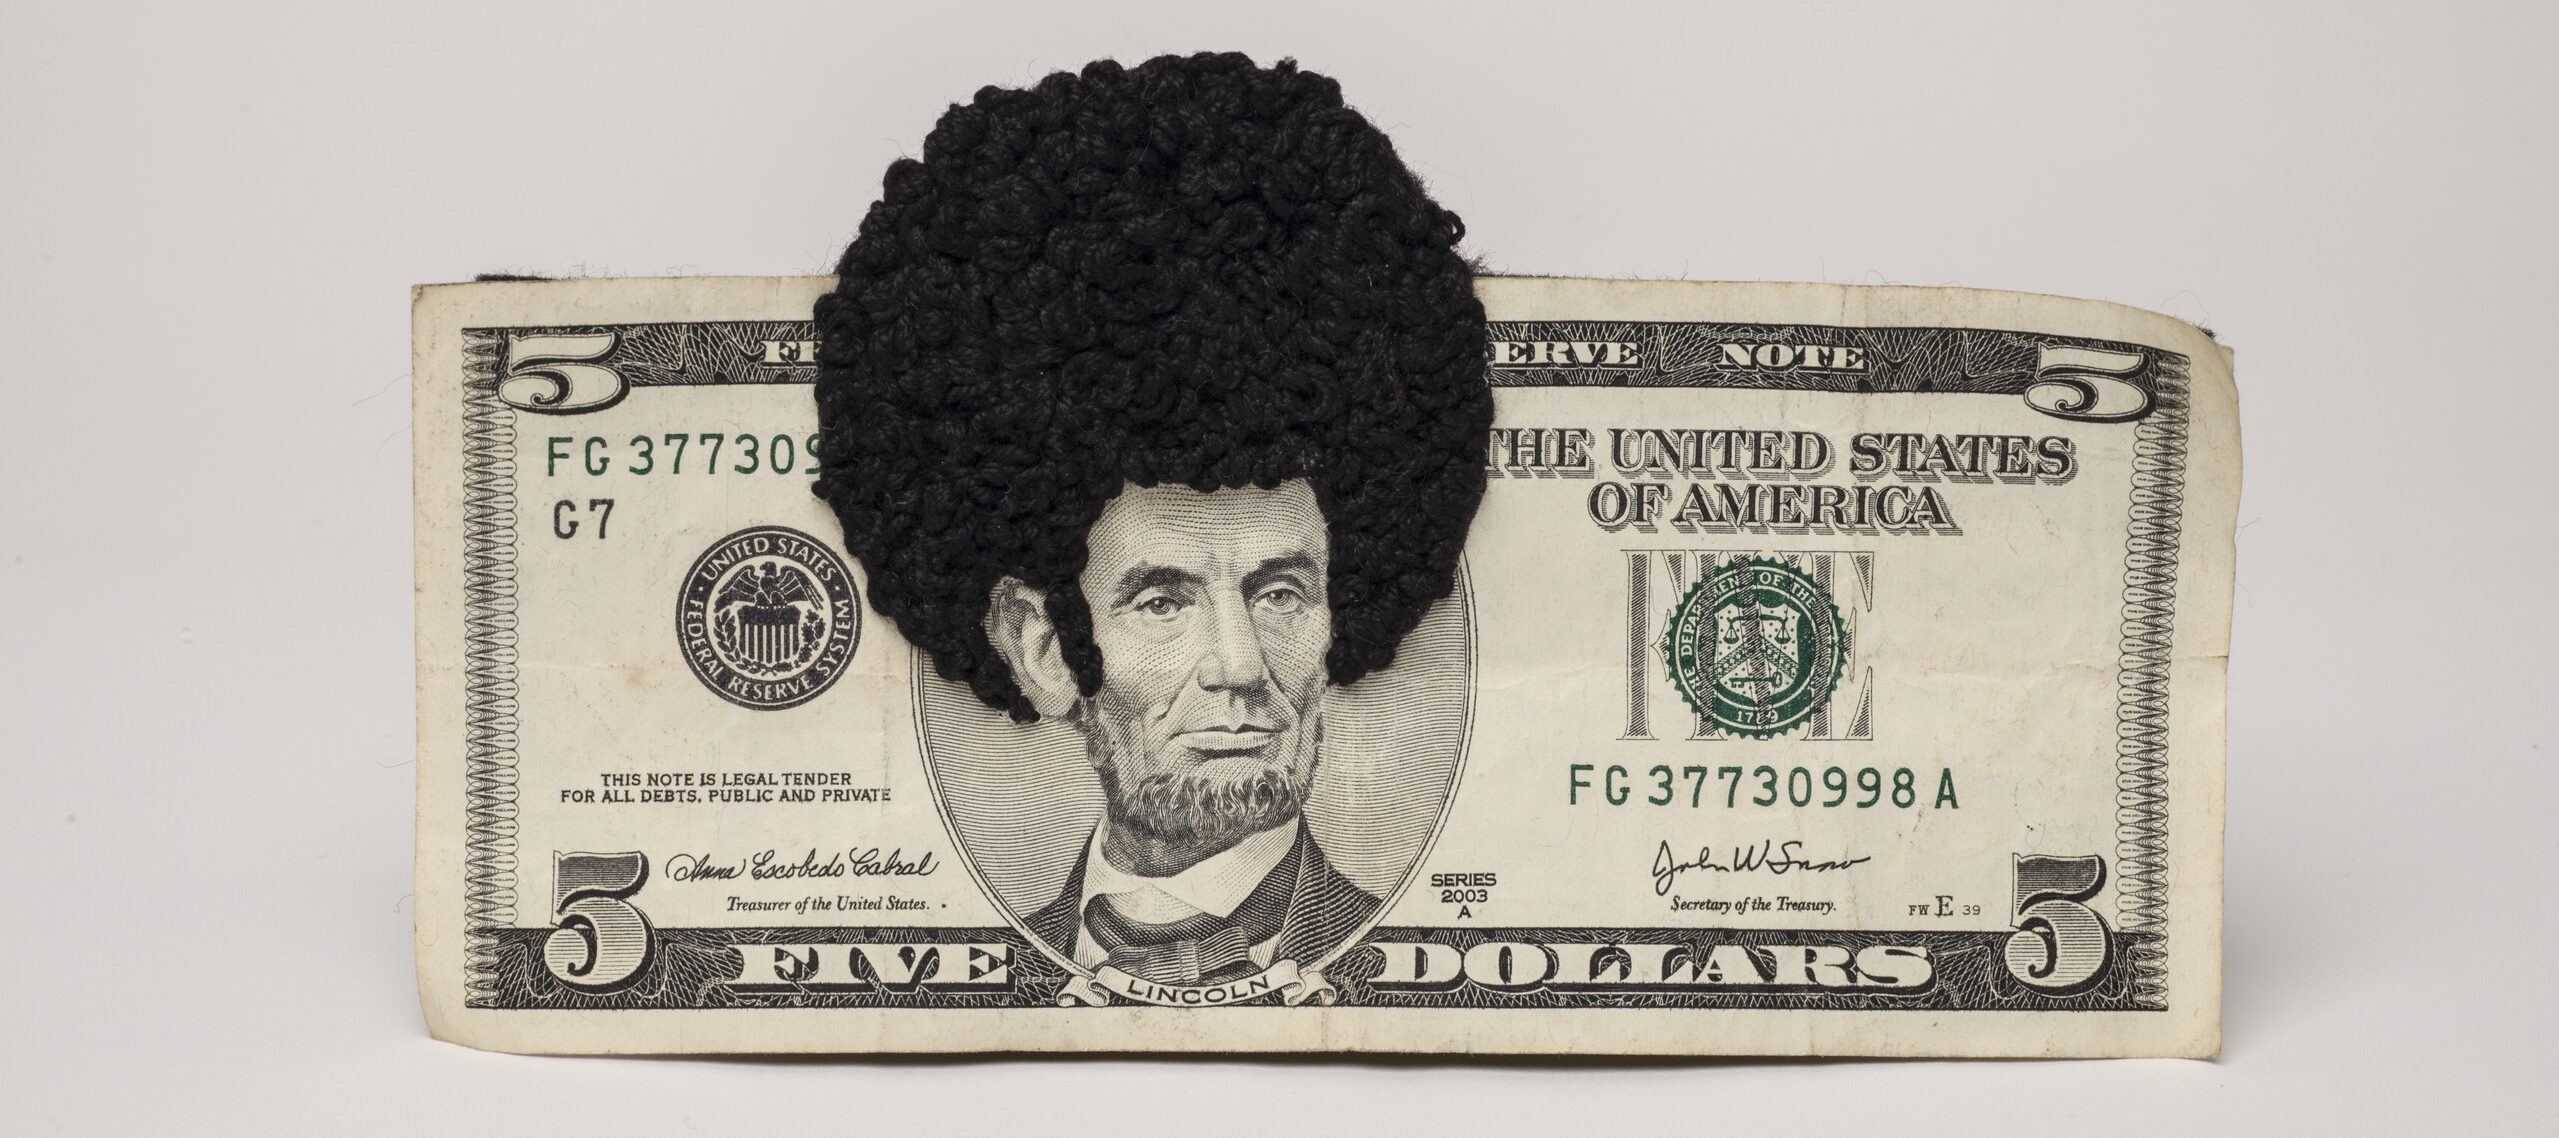 U.S. five-dollar bill has an embroidered afro and sideburns stitched onto the portrait of Lincoln’s head. One-third of the afro protrudes beyond the top of the bill.